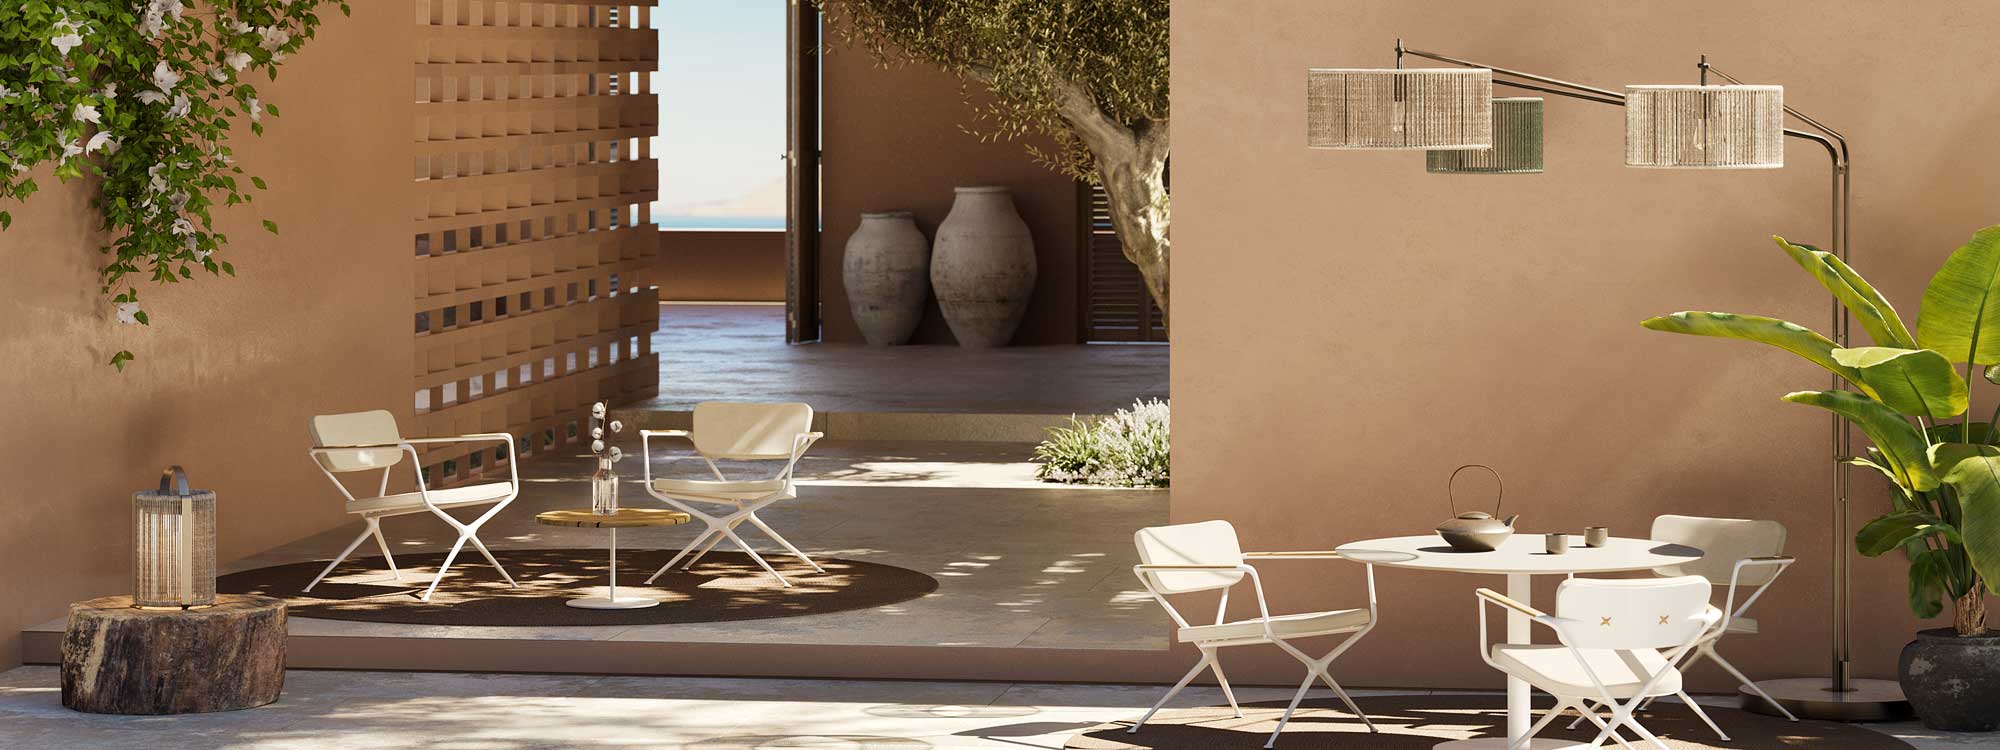 Image of Luniz multi-headed outdoor standard lamp by Royal Botania in chic courtyard